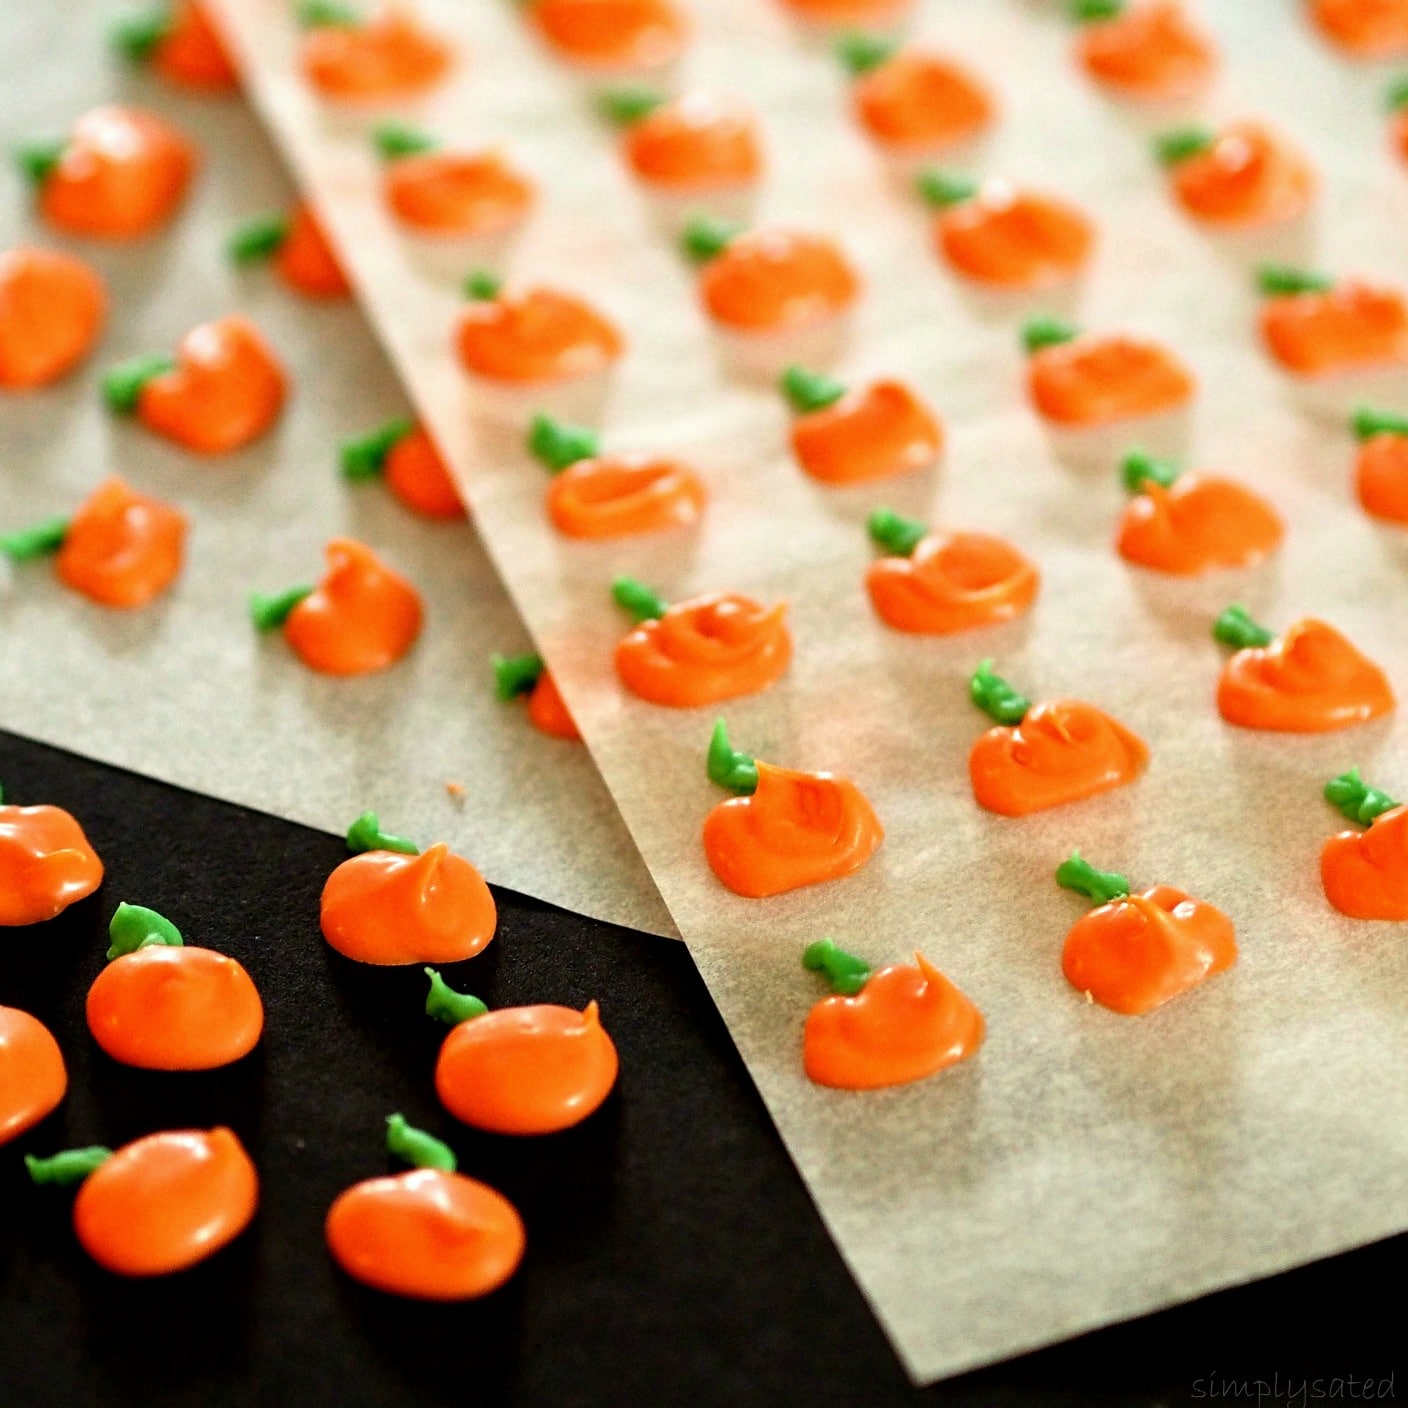 Pumpkin Candy Toppers are easy, quick and fun decorations to have on hand during the fall season.